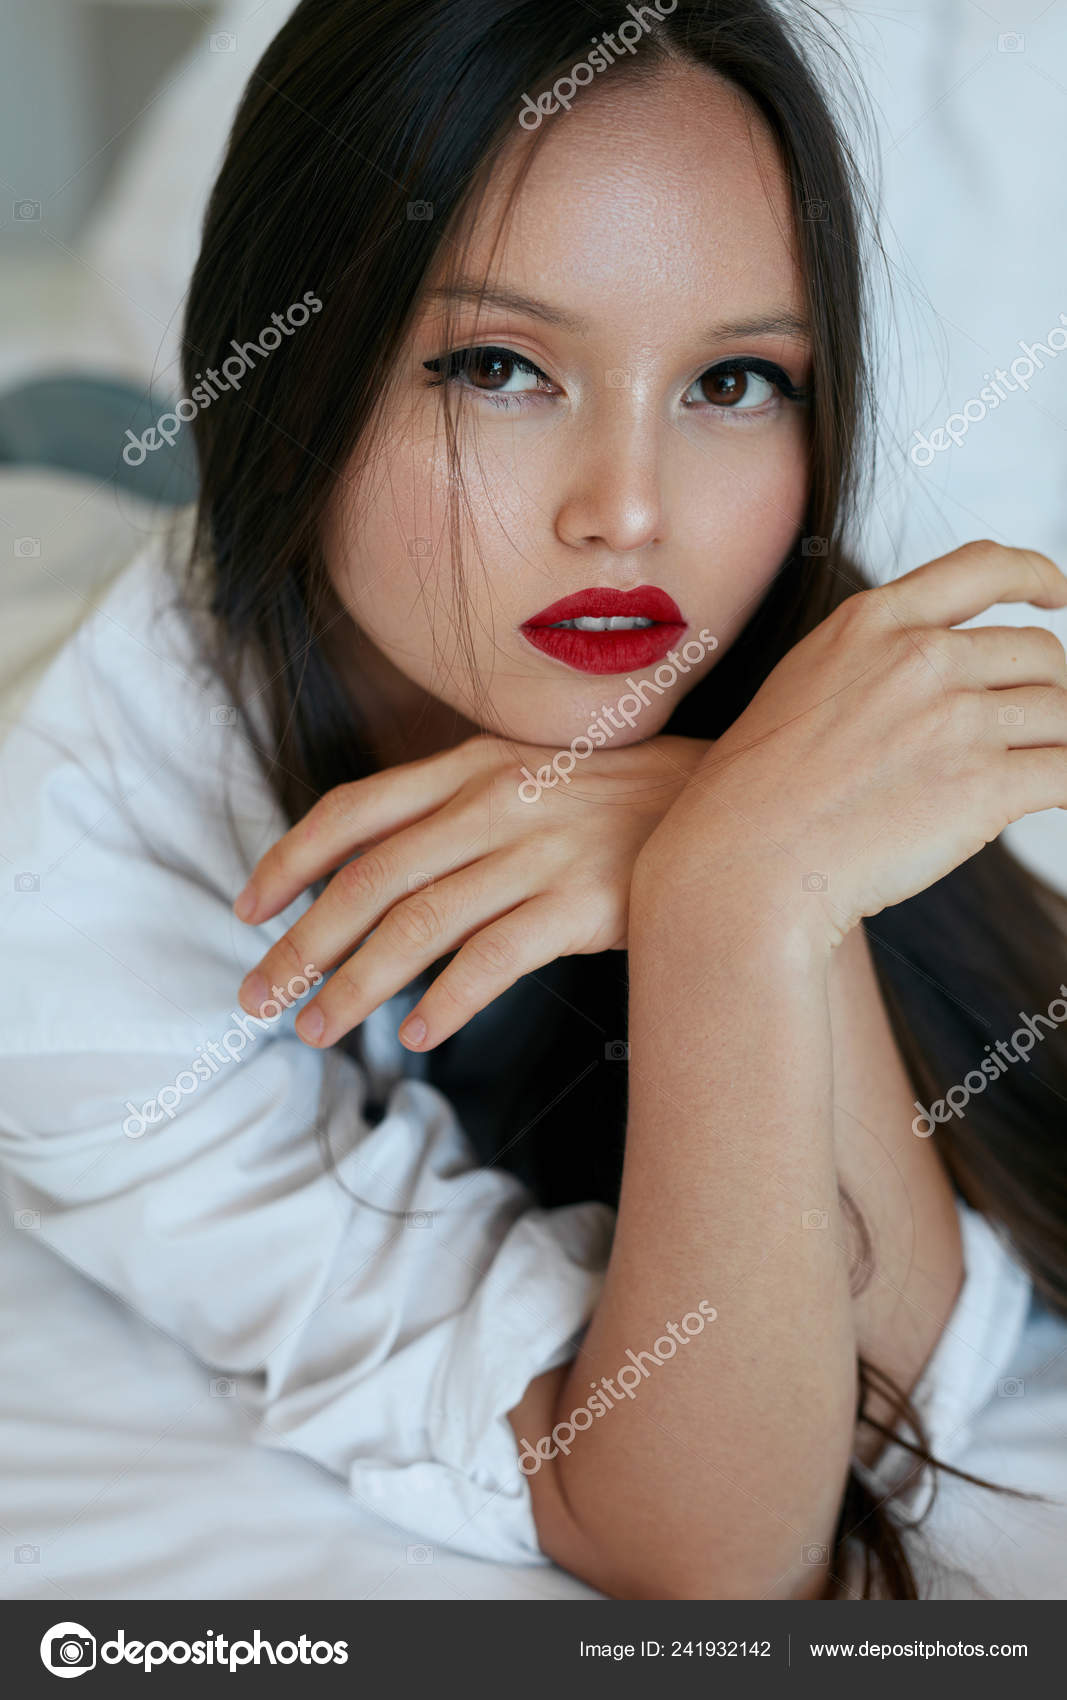 white shirt with red lips